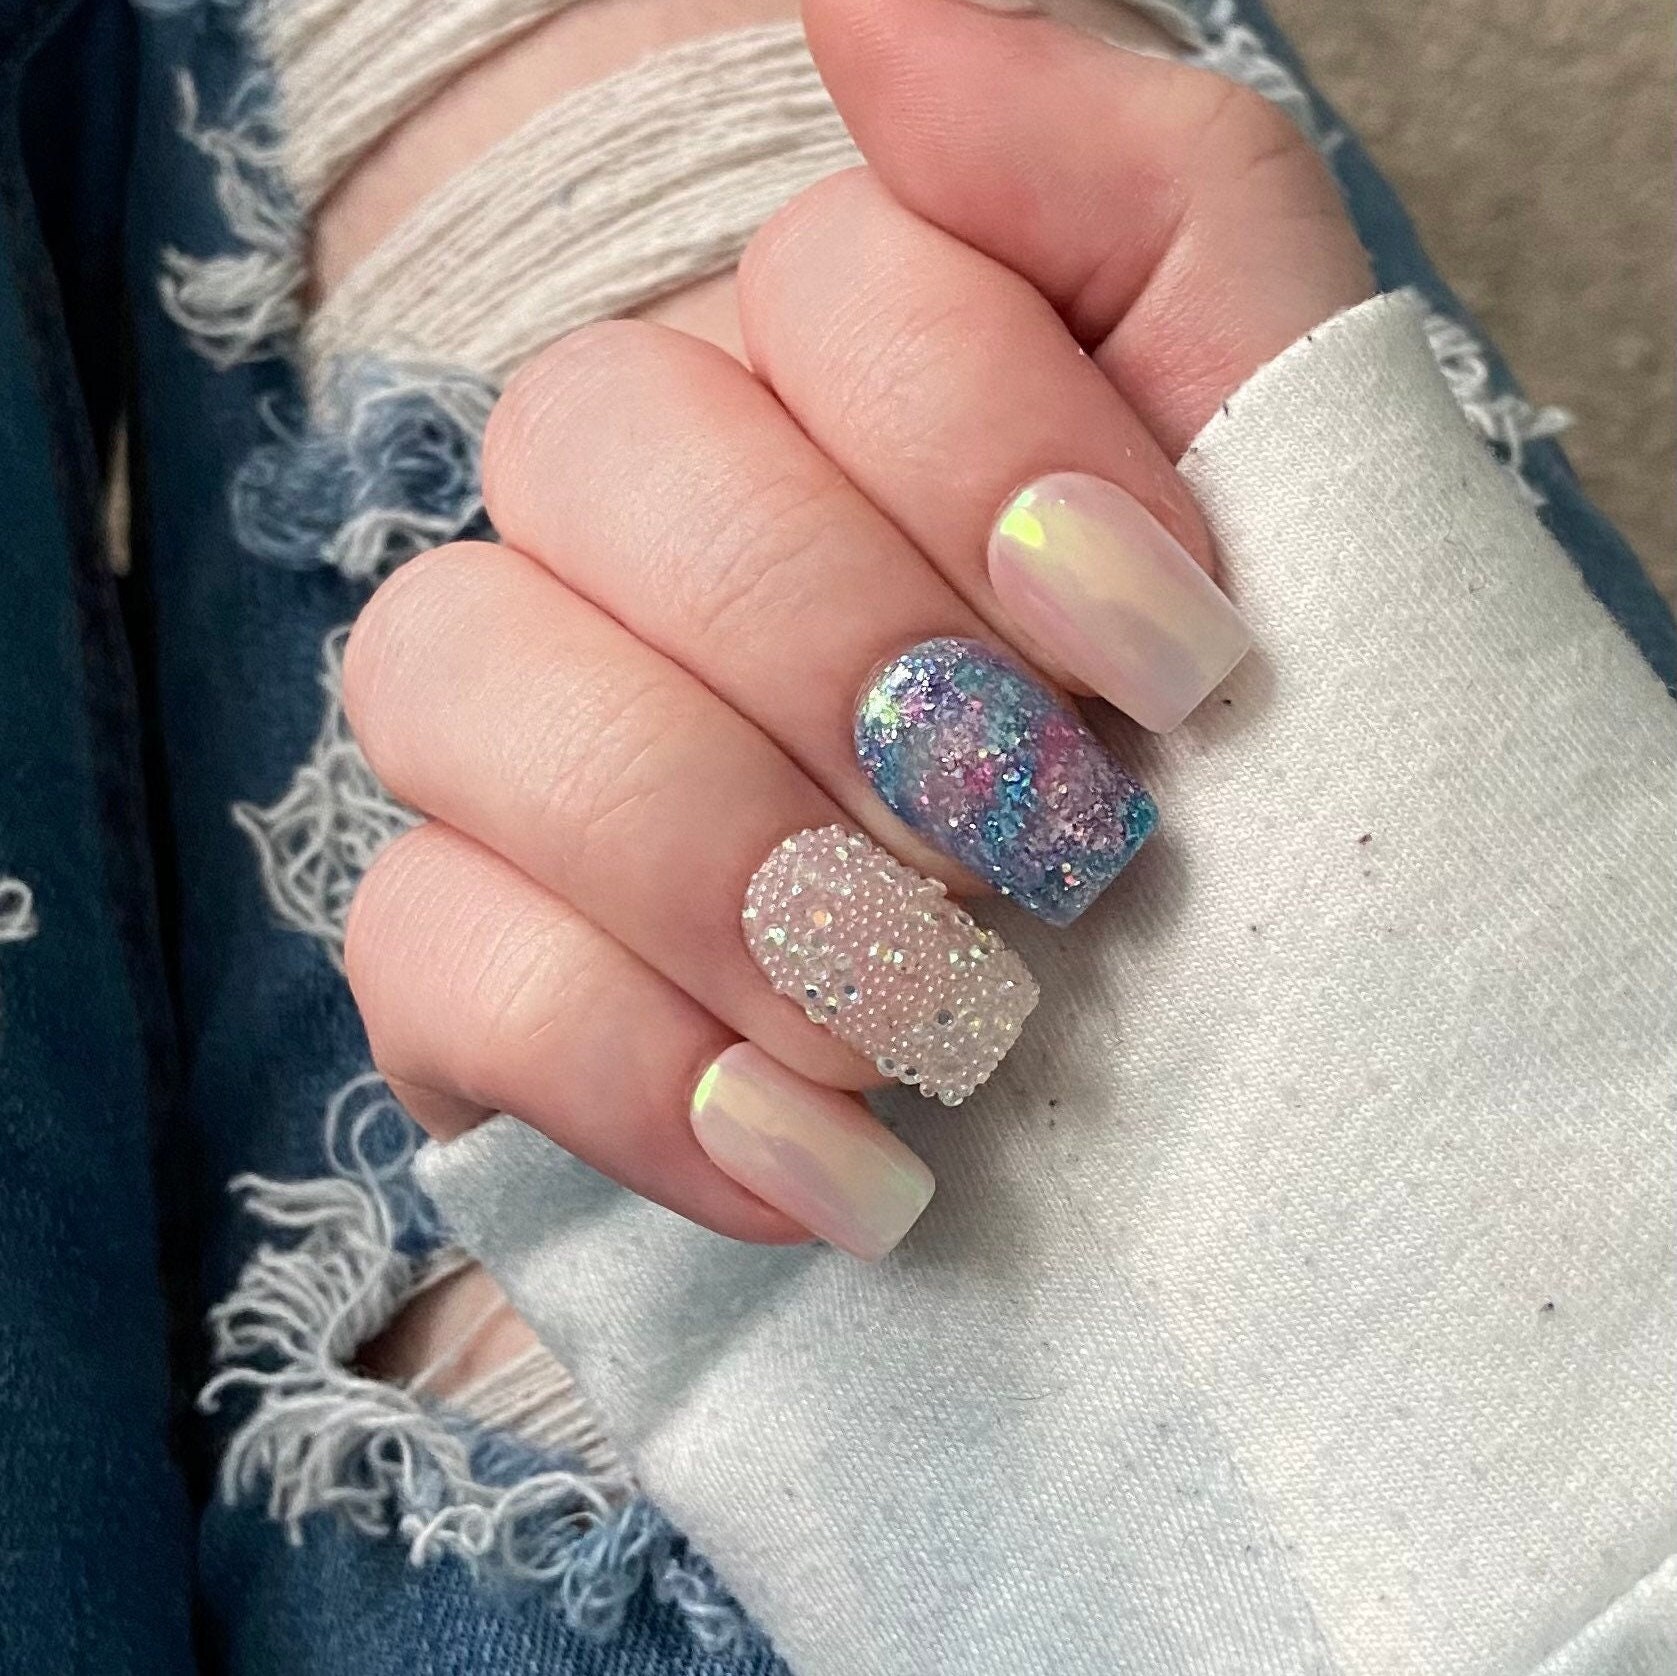 Iridescent 'mother of pearl' nails are bringing mermaidcore to your  fingertips